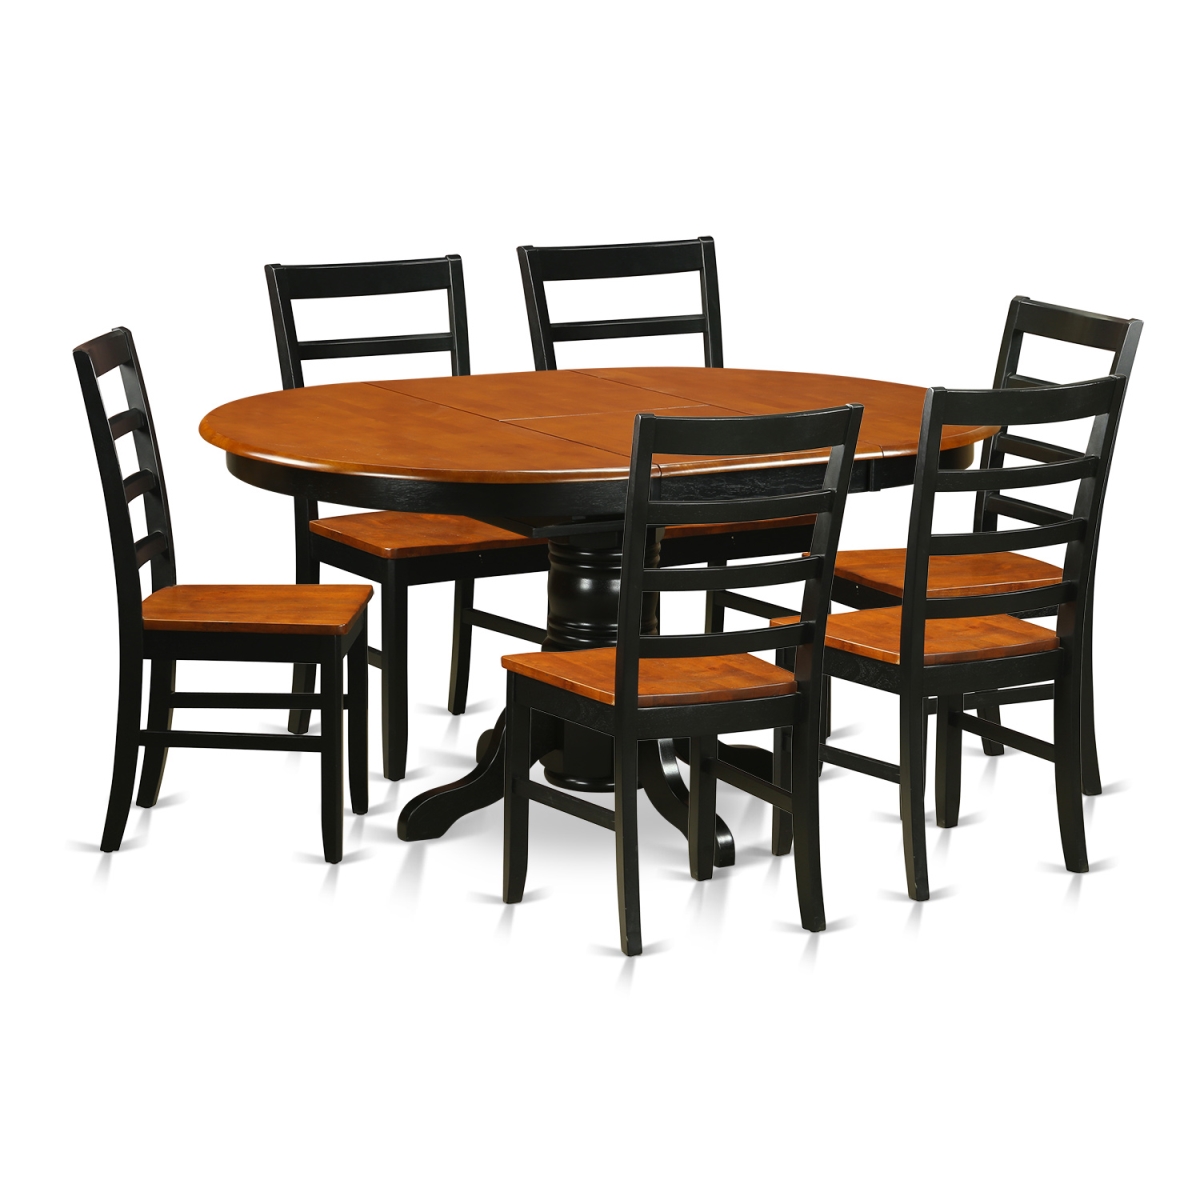 Picture of East West Furniture AVPF7-BCH-W Wood Seat Dining Set with 6 Wooden Chair, Black & Cherry - 7 Piece